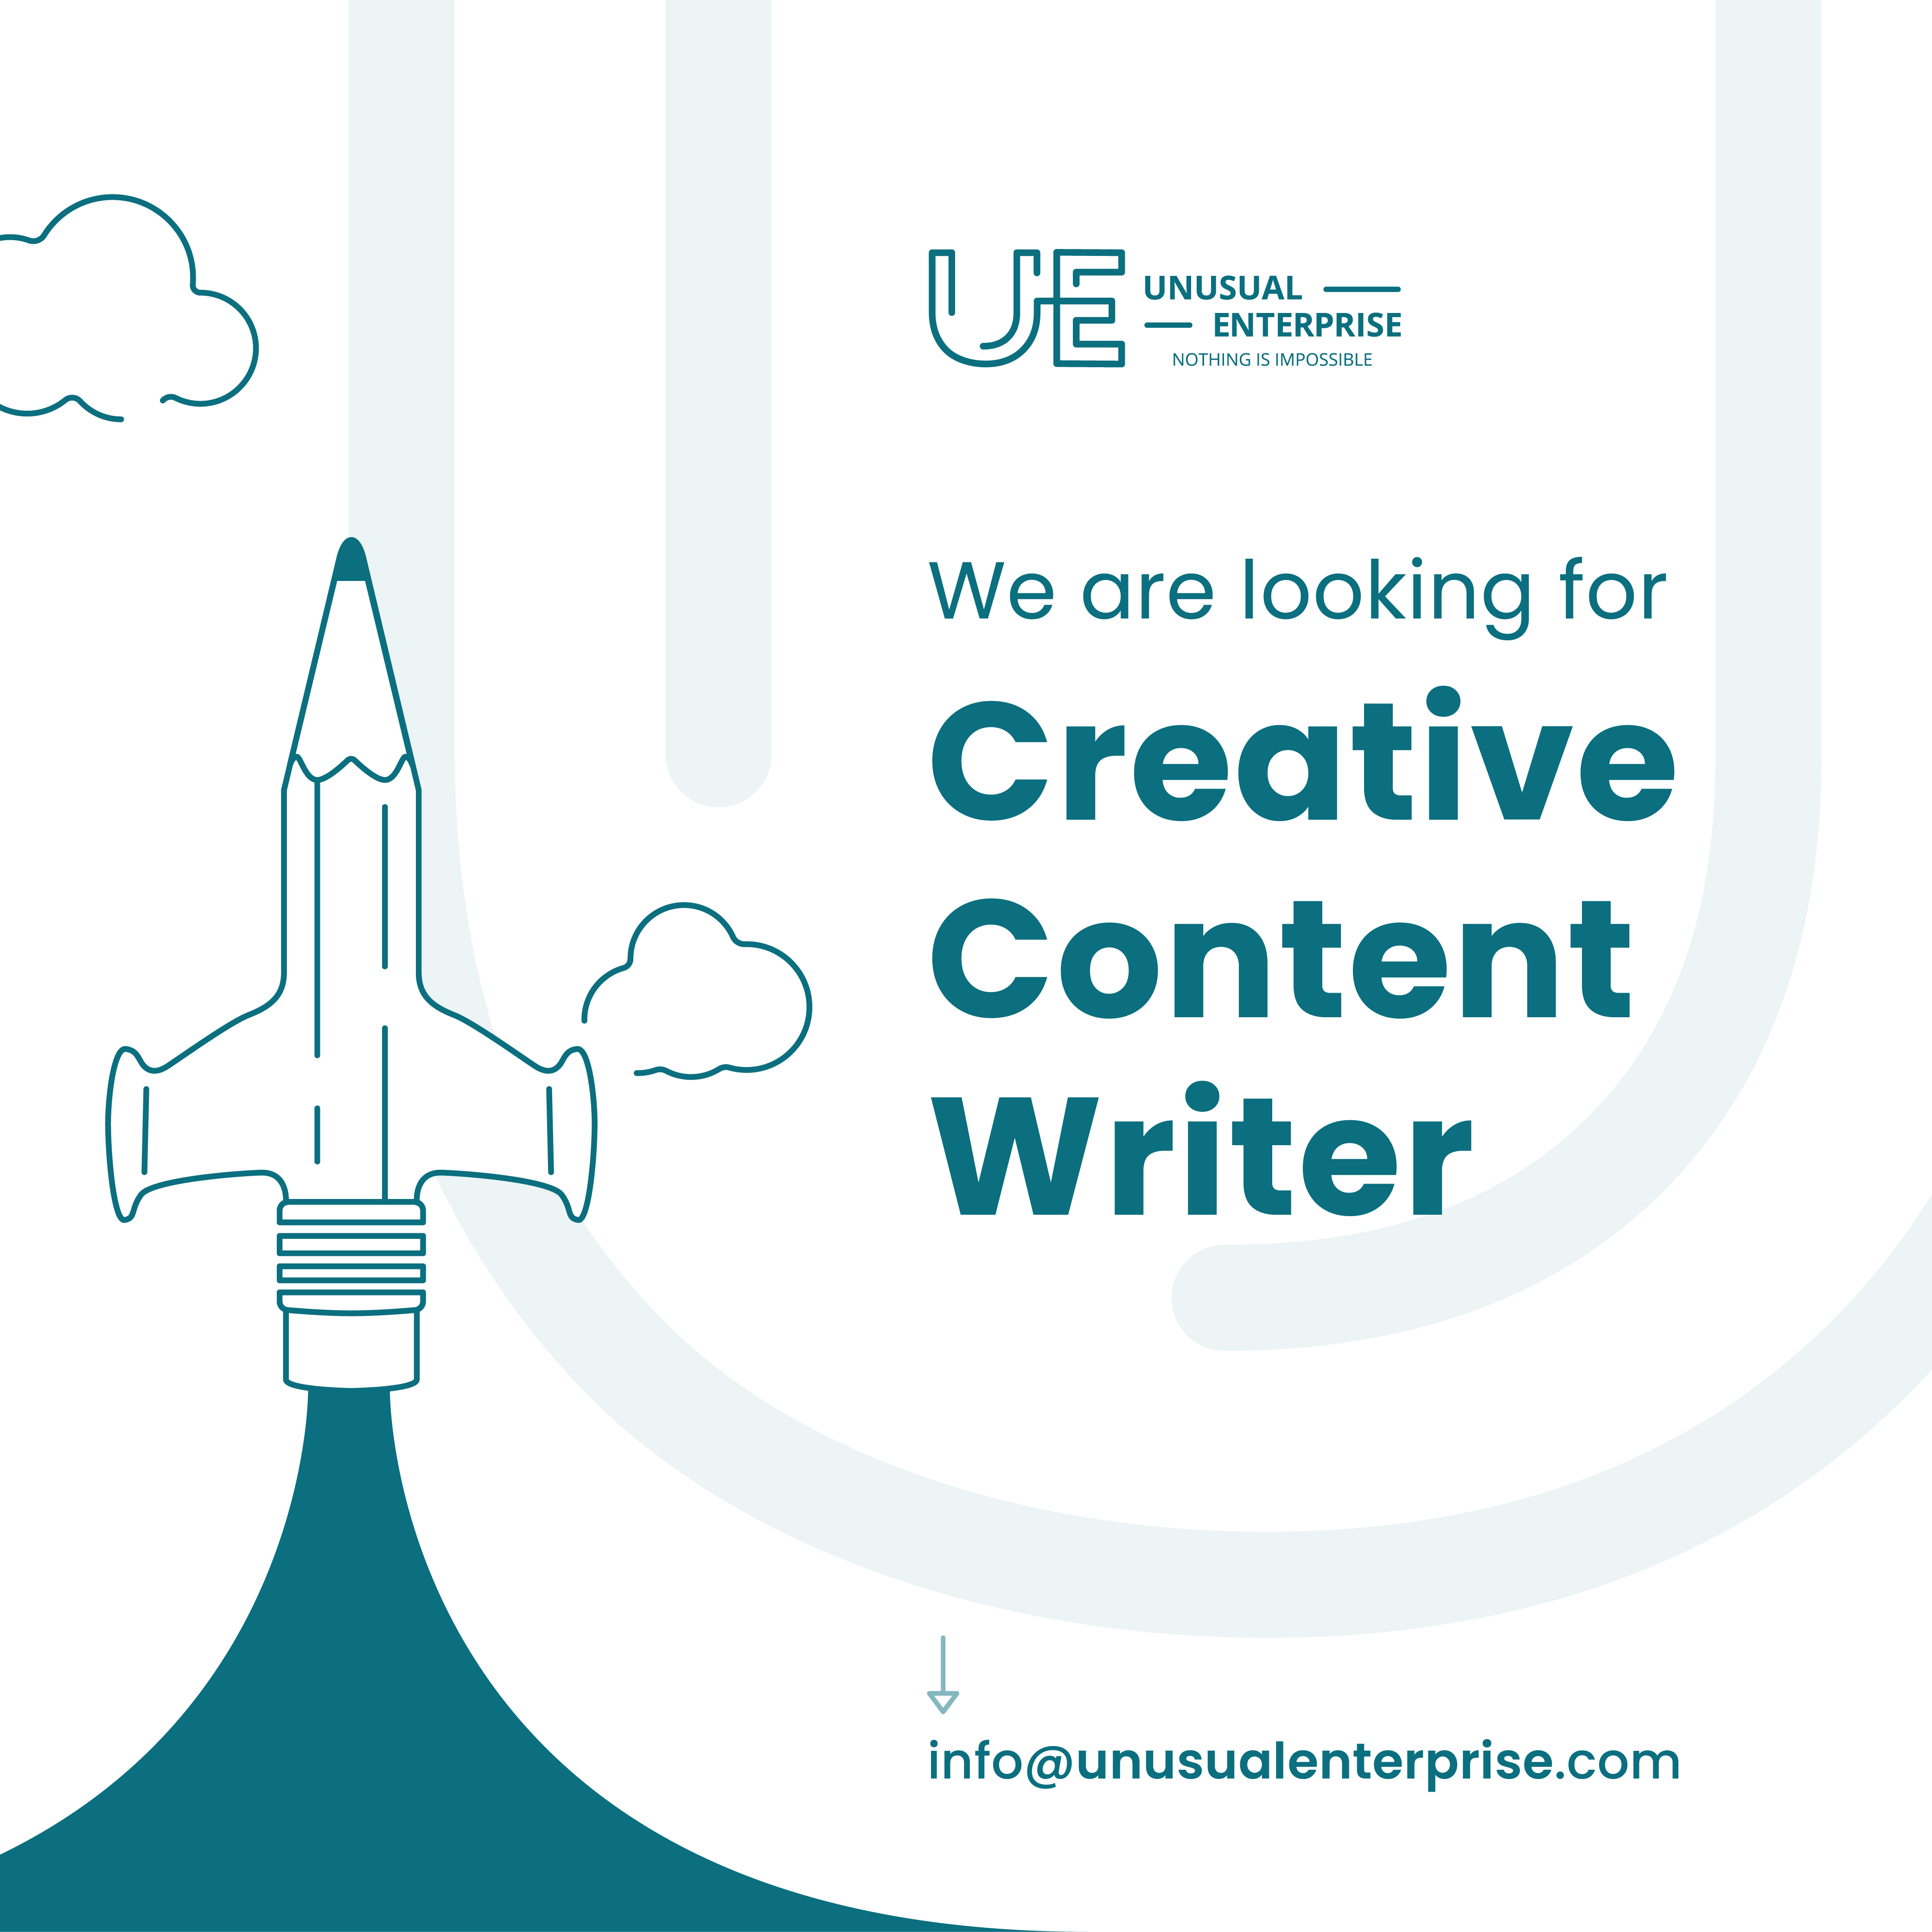 Unusual Growth Agency is looking for Creative Content Writer!